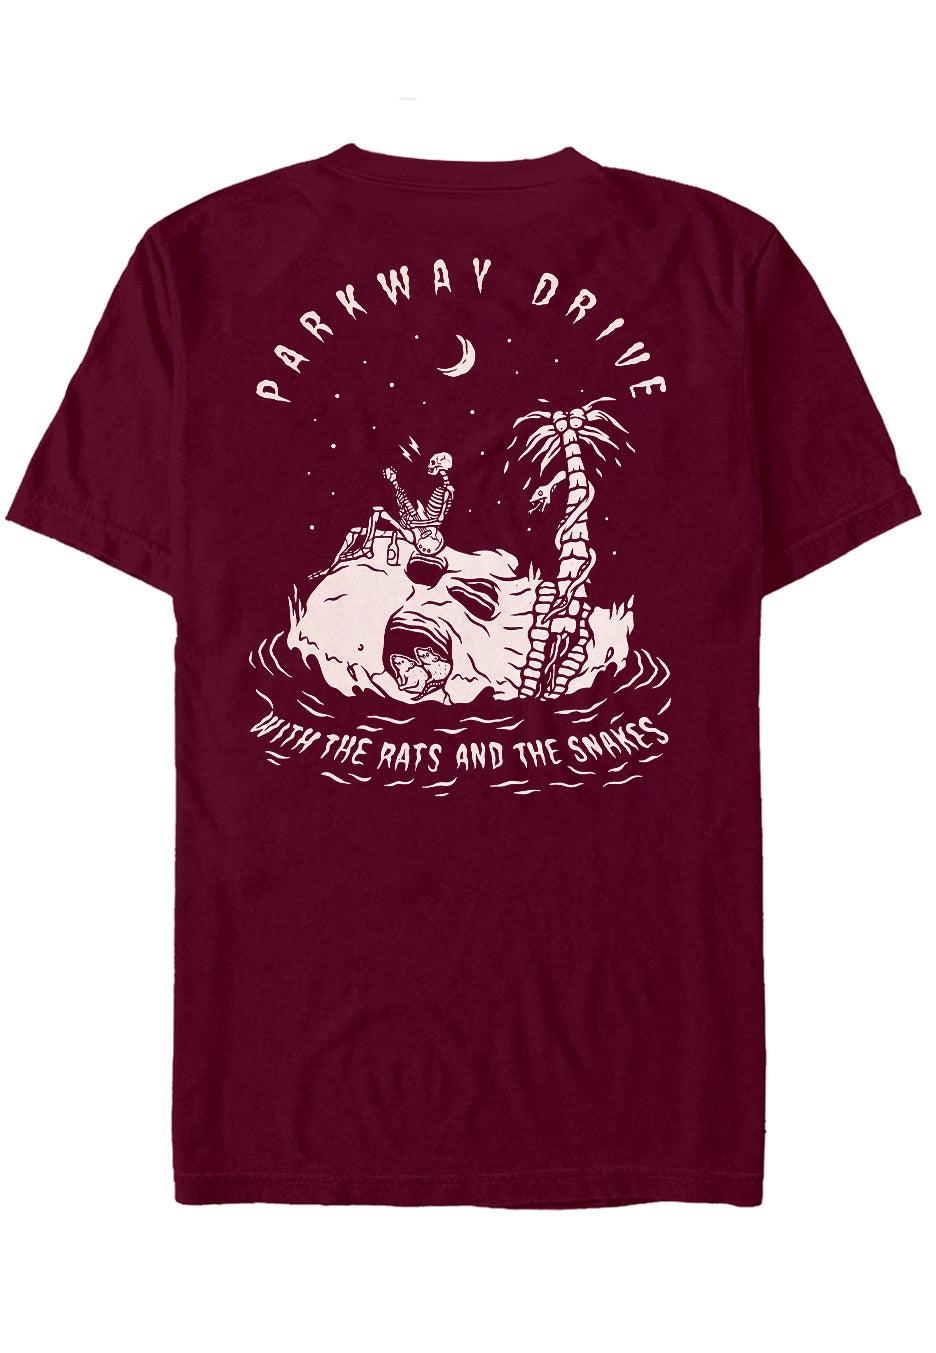 Parkway Drive - Rats And Snakes Burgundy - T-Shirt